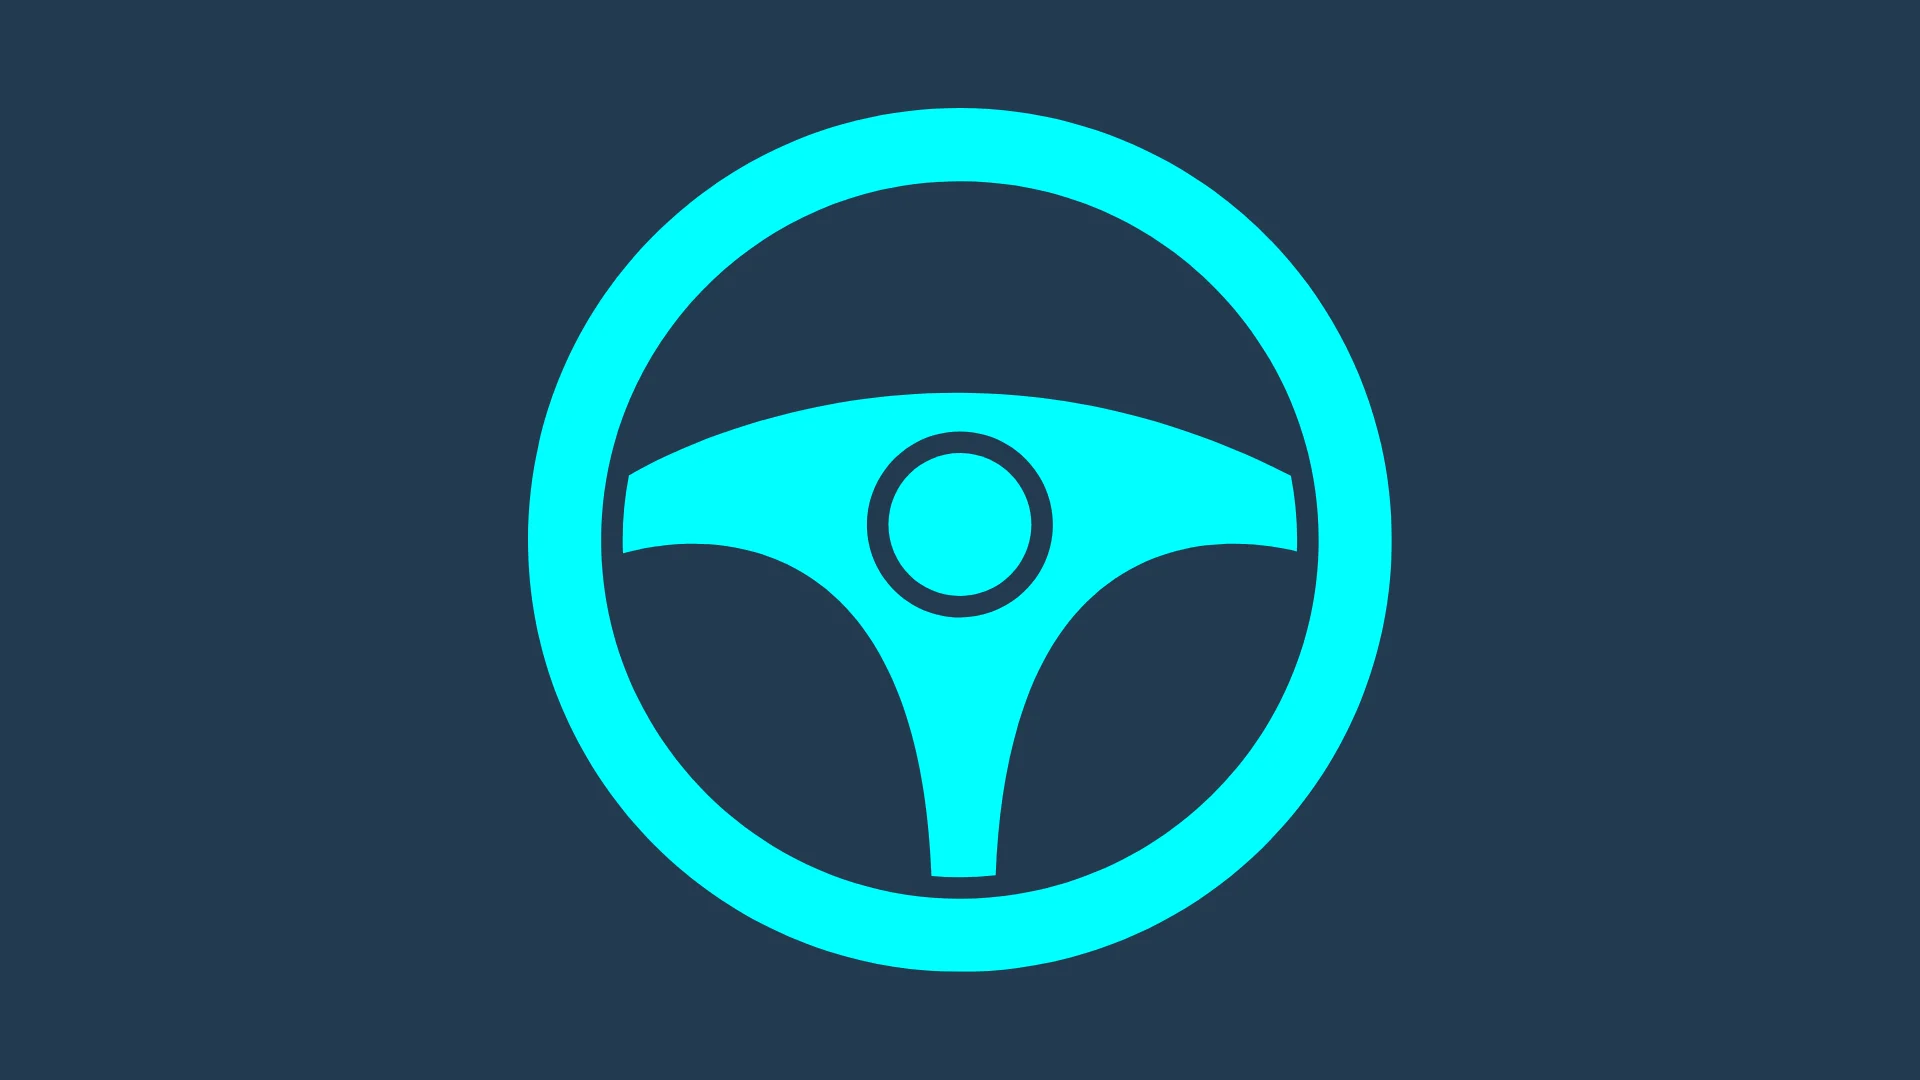 A blue steering wheel icon on a dark background with golf targets.